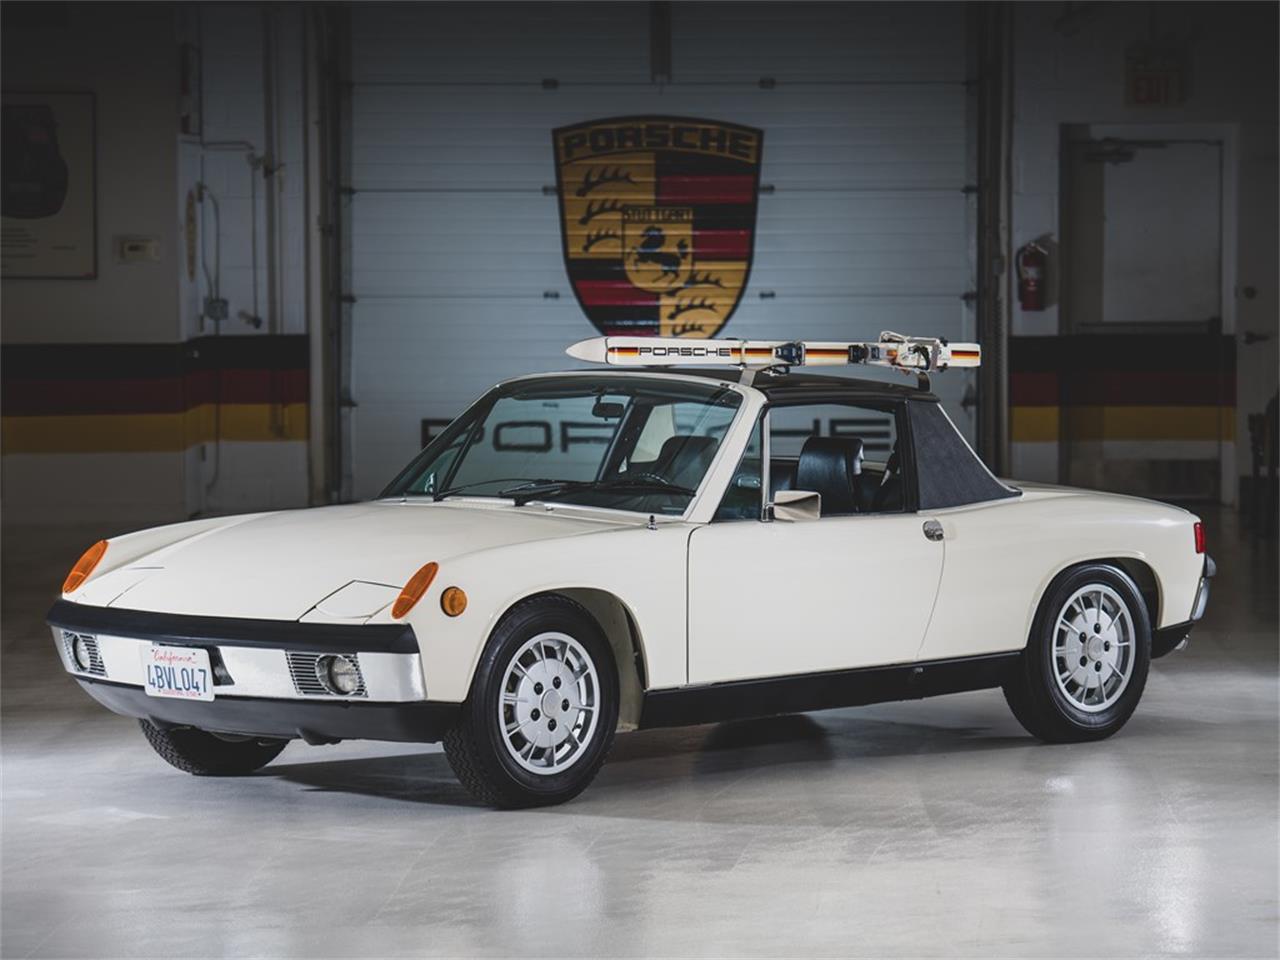 For Sale at Auction: 1970 Porsche 914/6 for sale in Dayton, OH